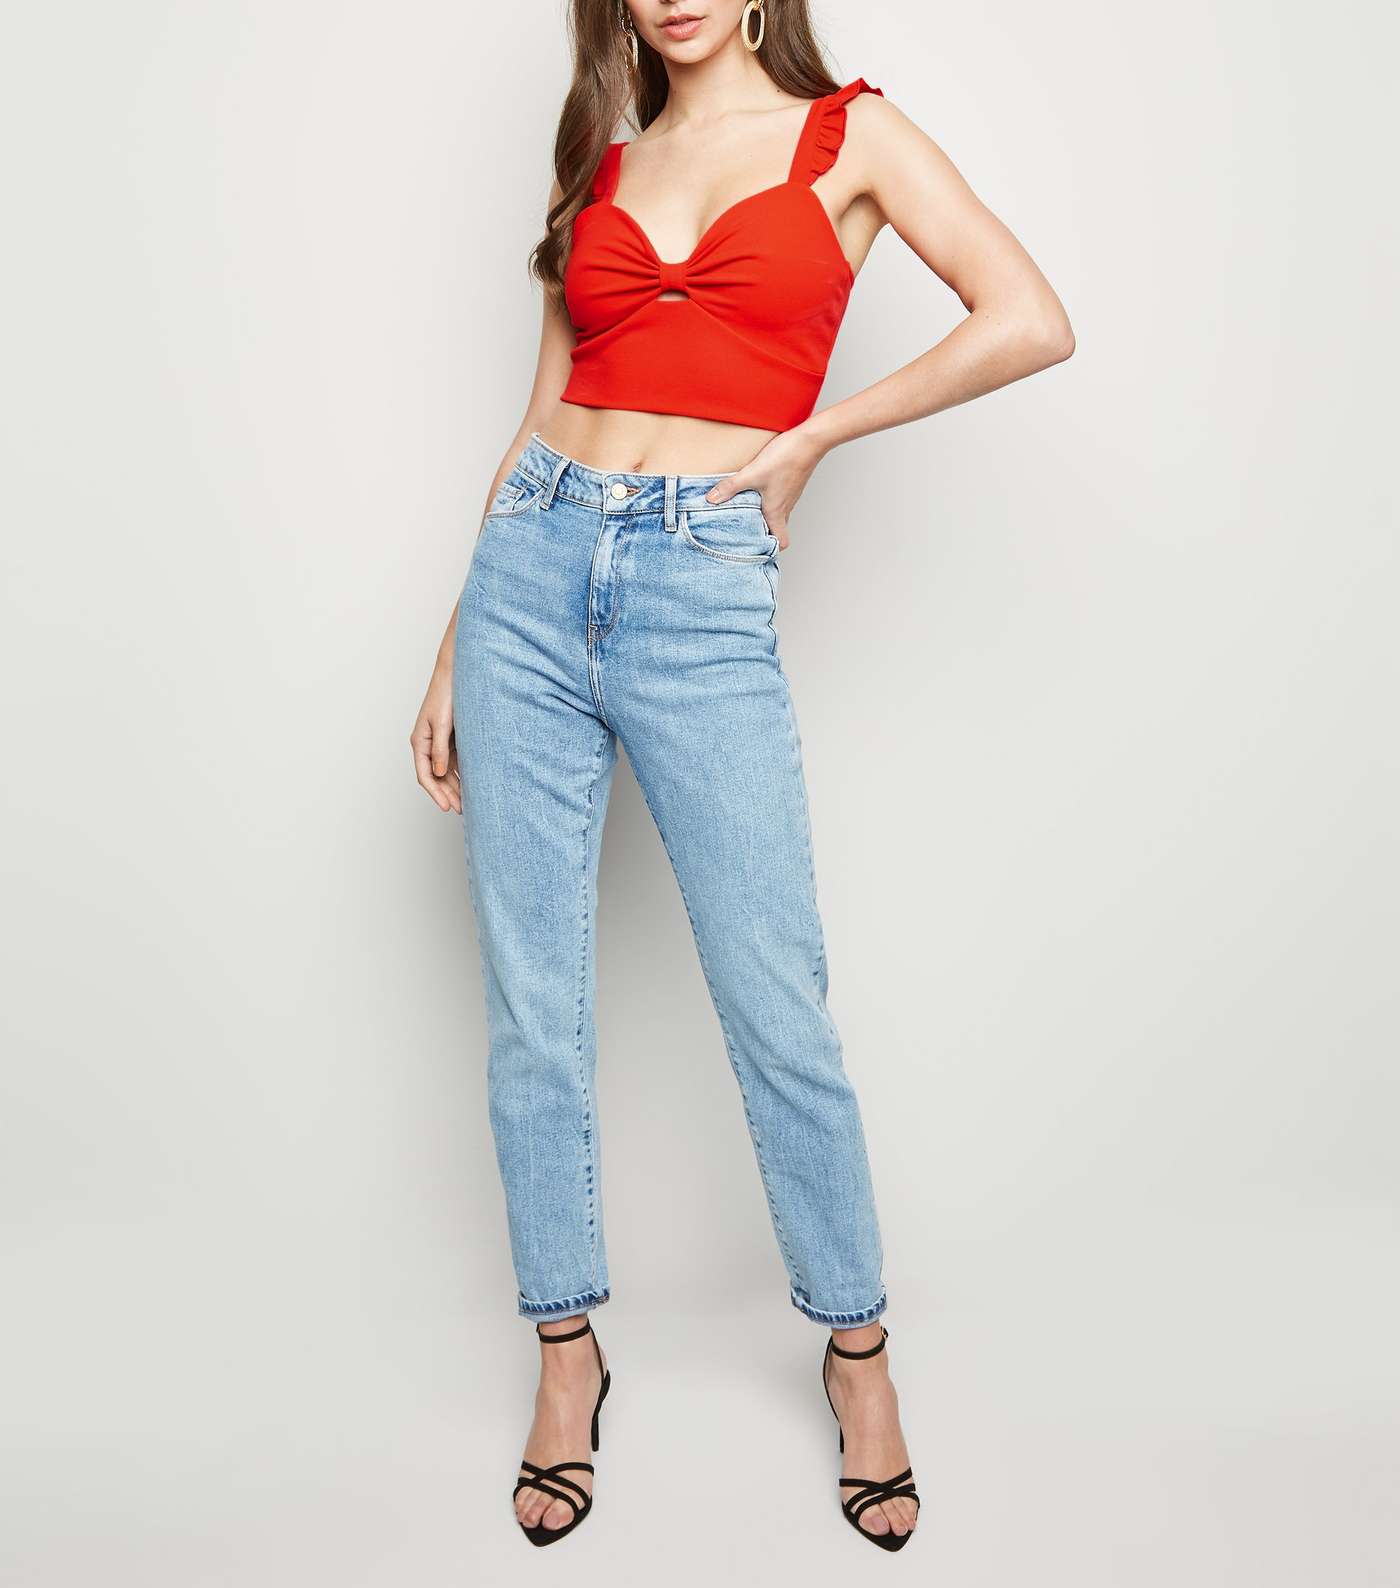 Red Bow Front Crop Top Image 2